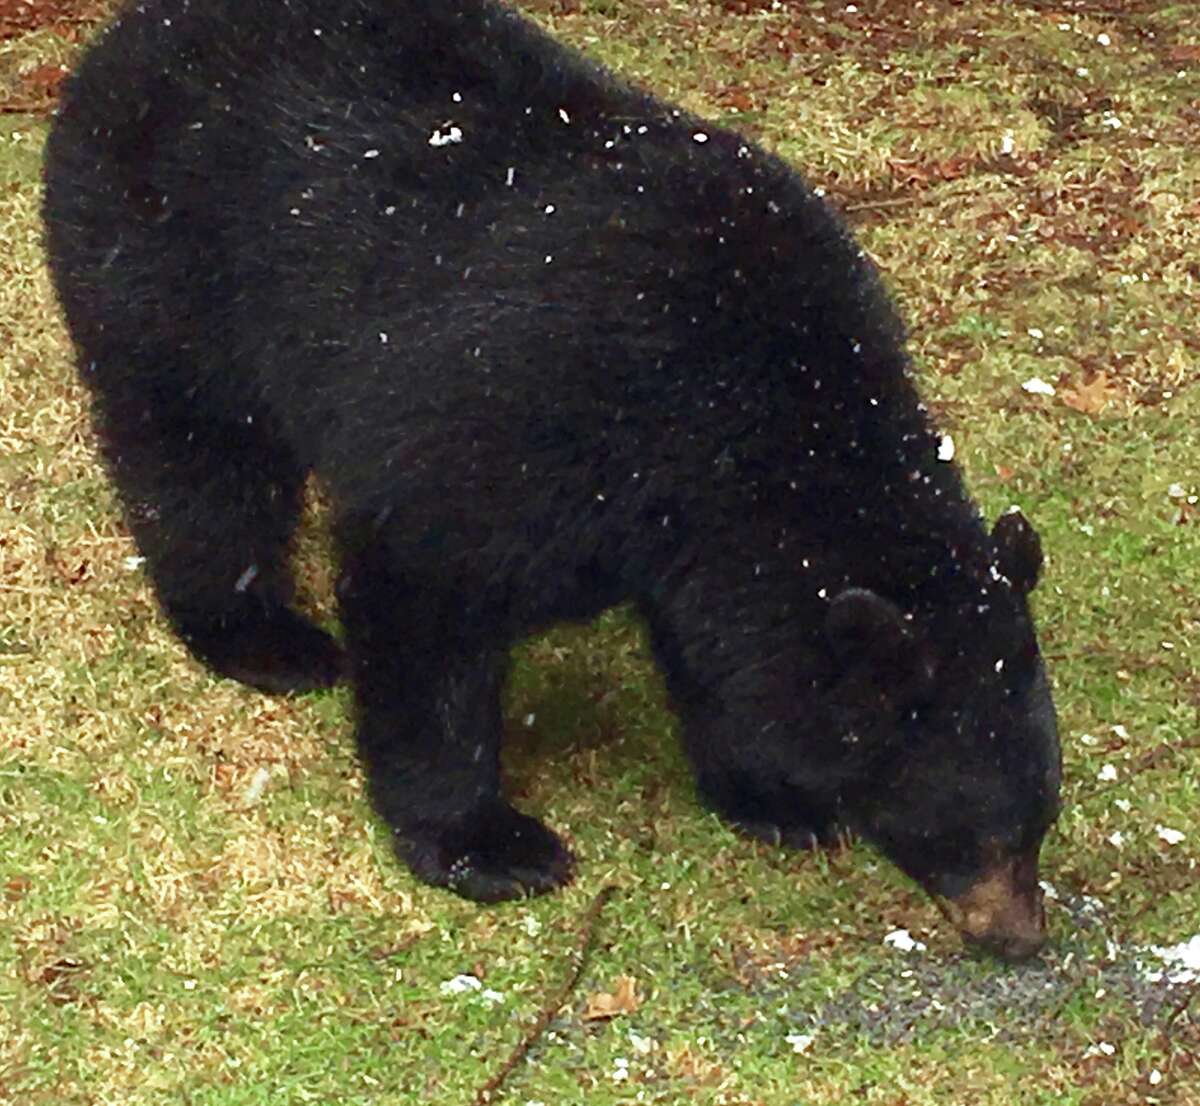 A black bear was sighted in New Milford on March 13, 2018.